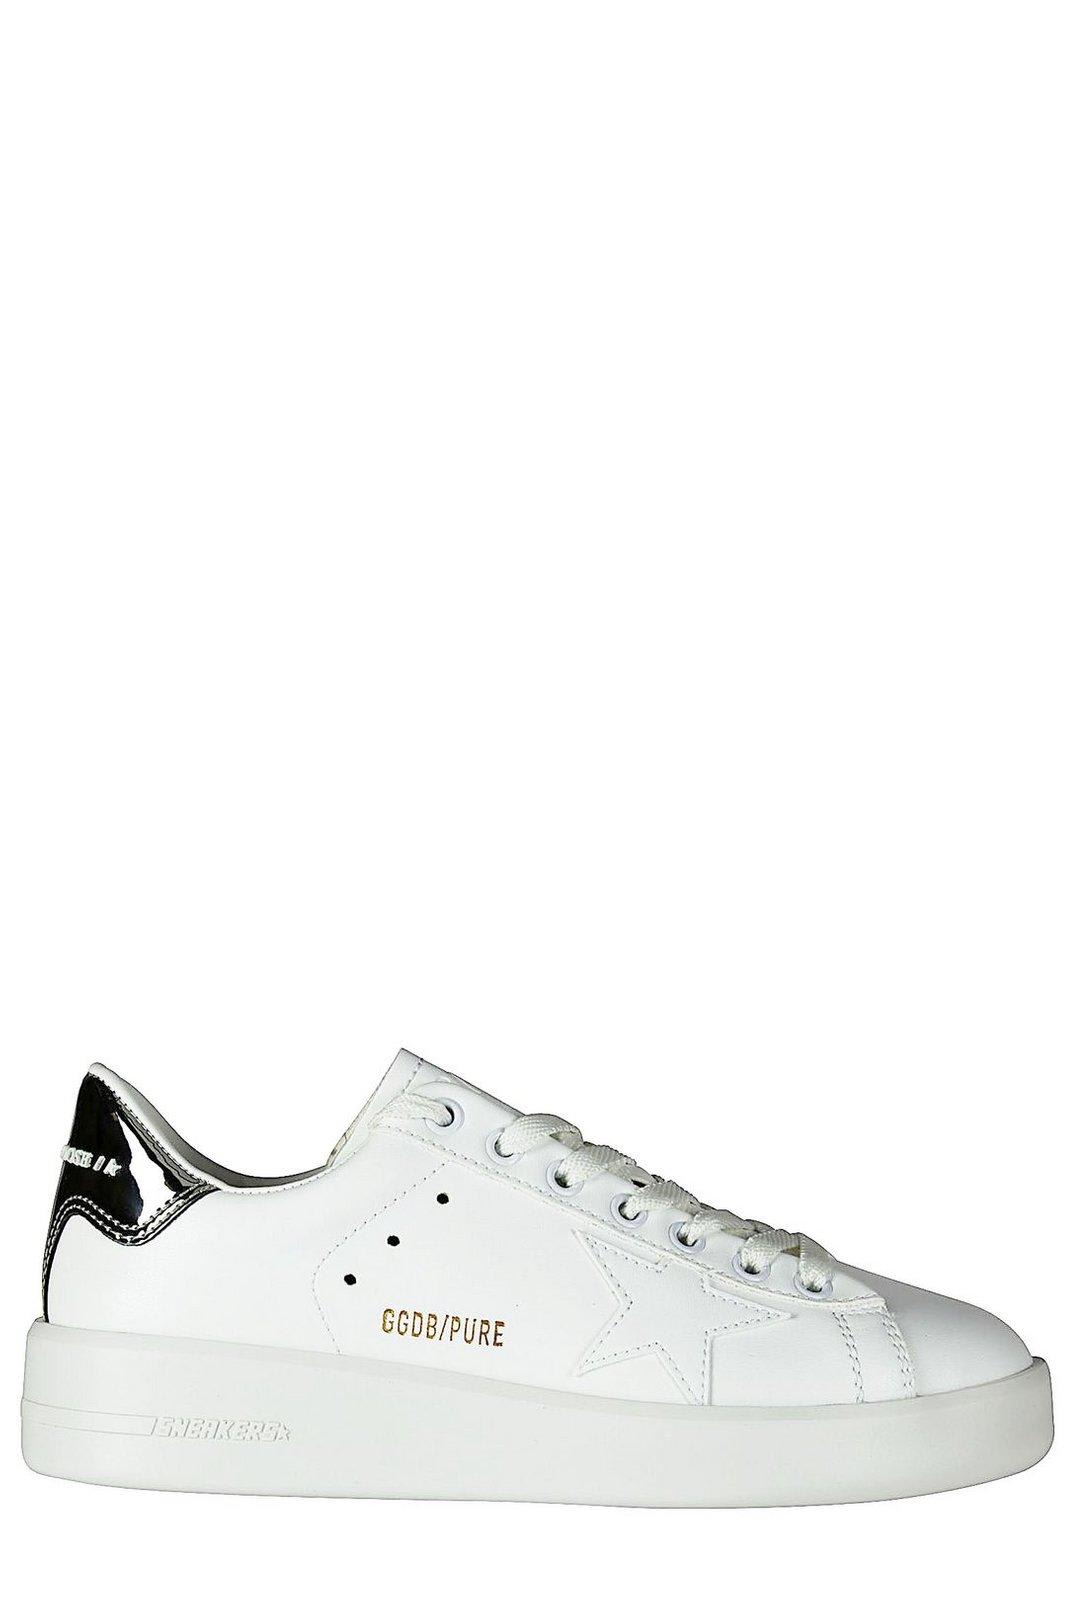 Golden Goose Logo Printed Lace-up Sneakers In White/silver